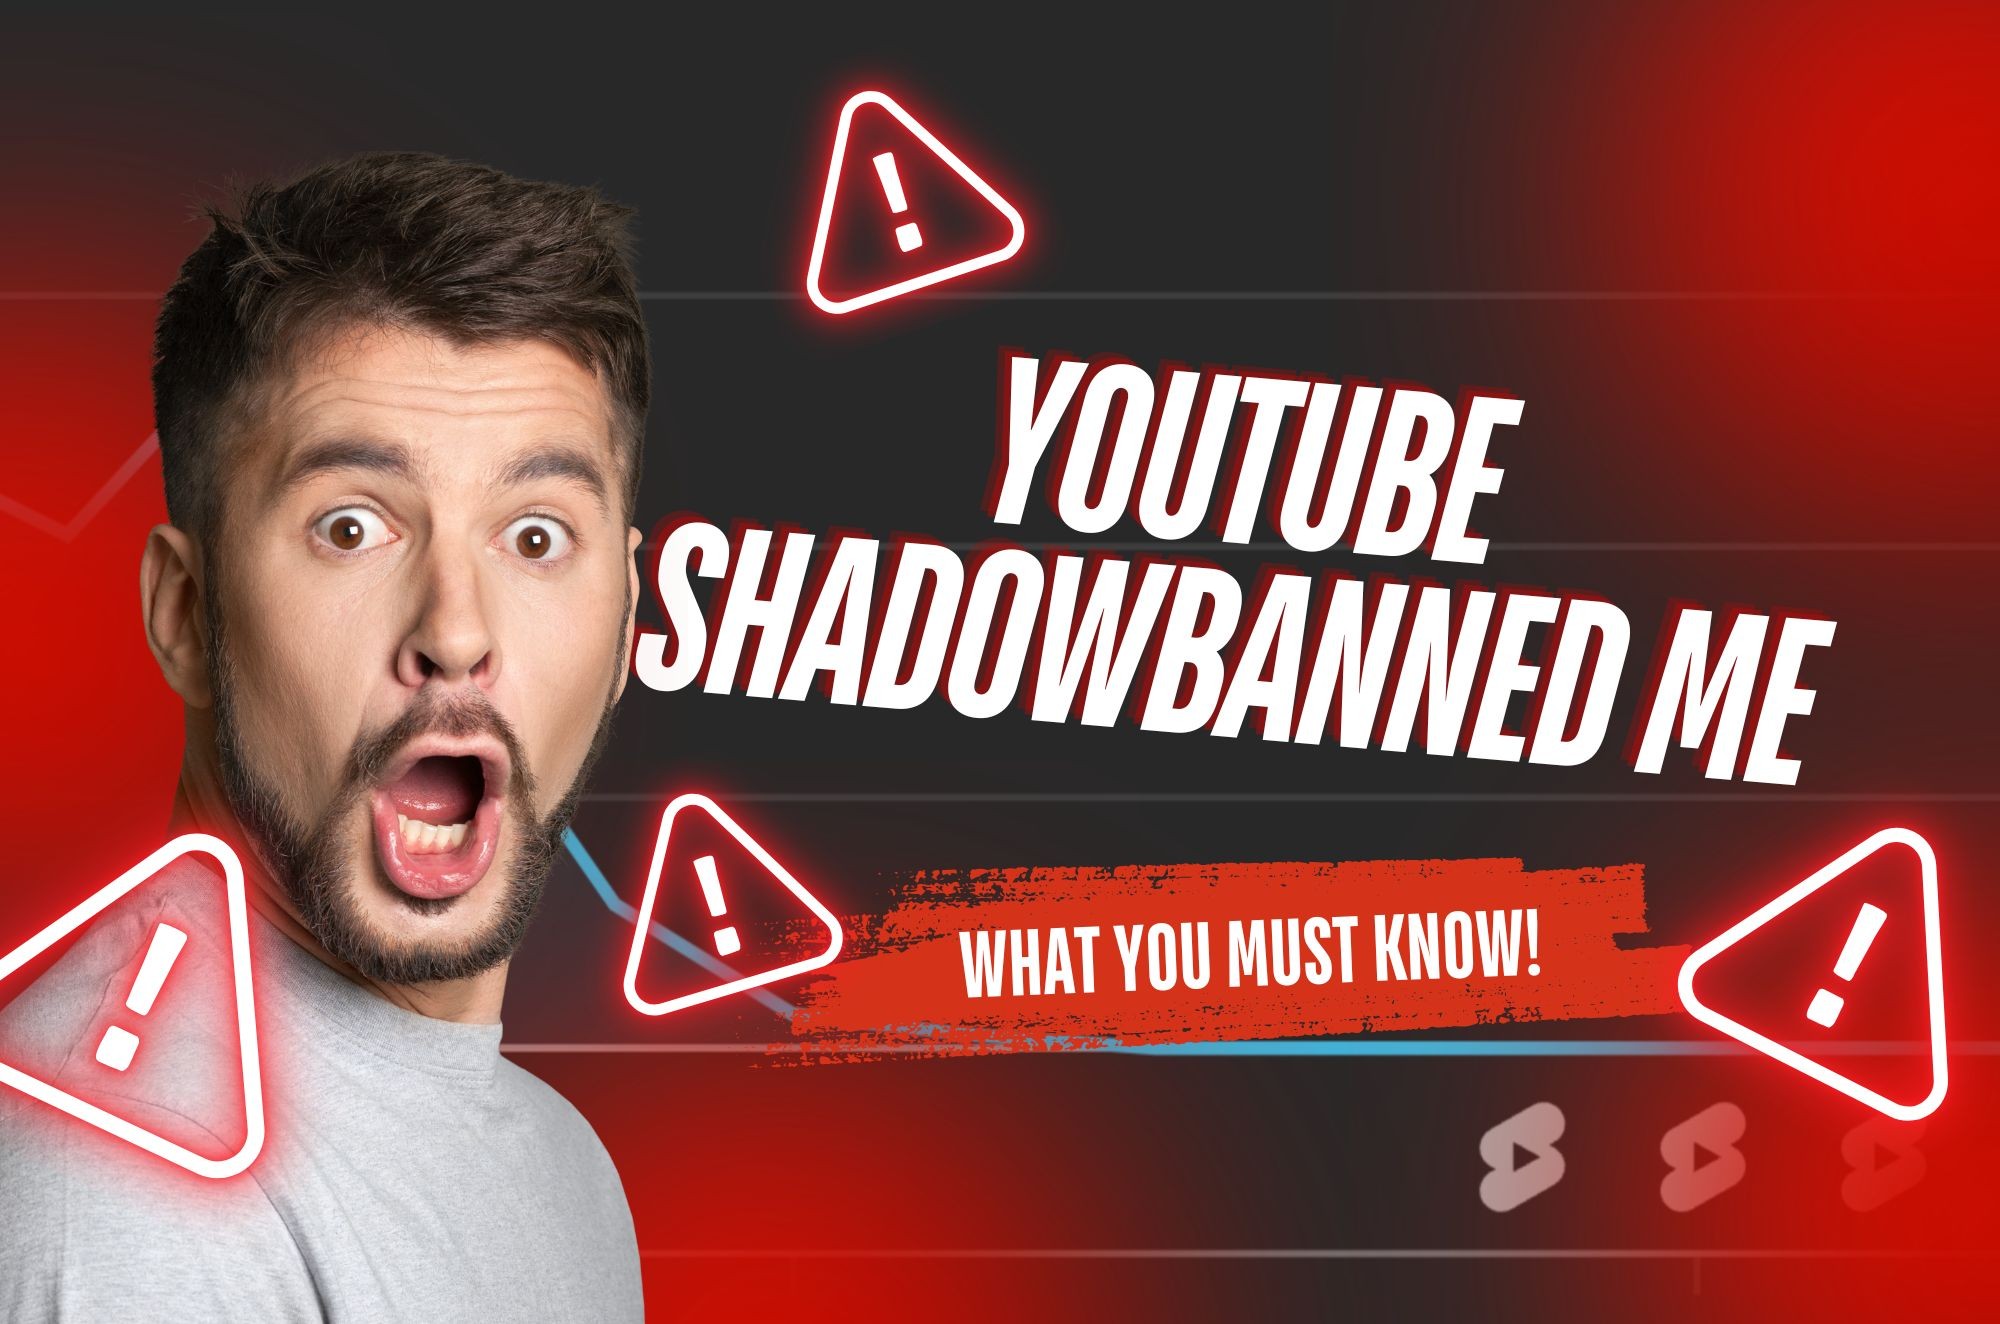 Reality of YouTube Shadowban - My Story